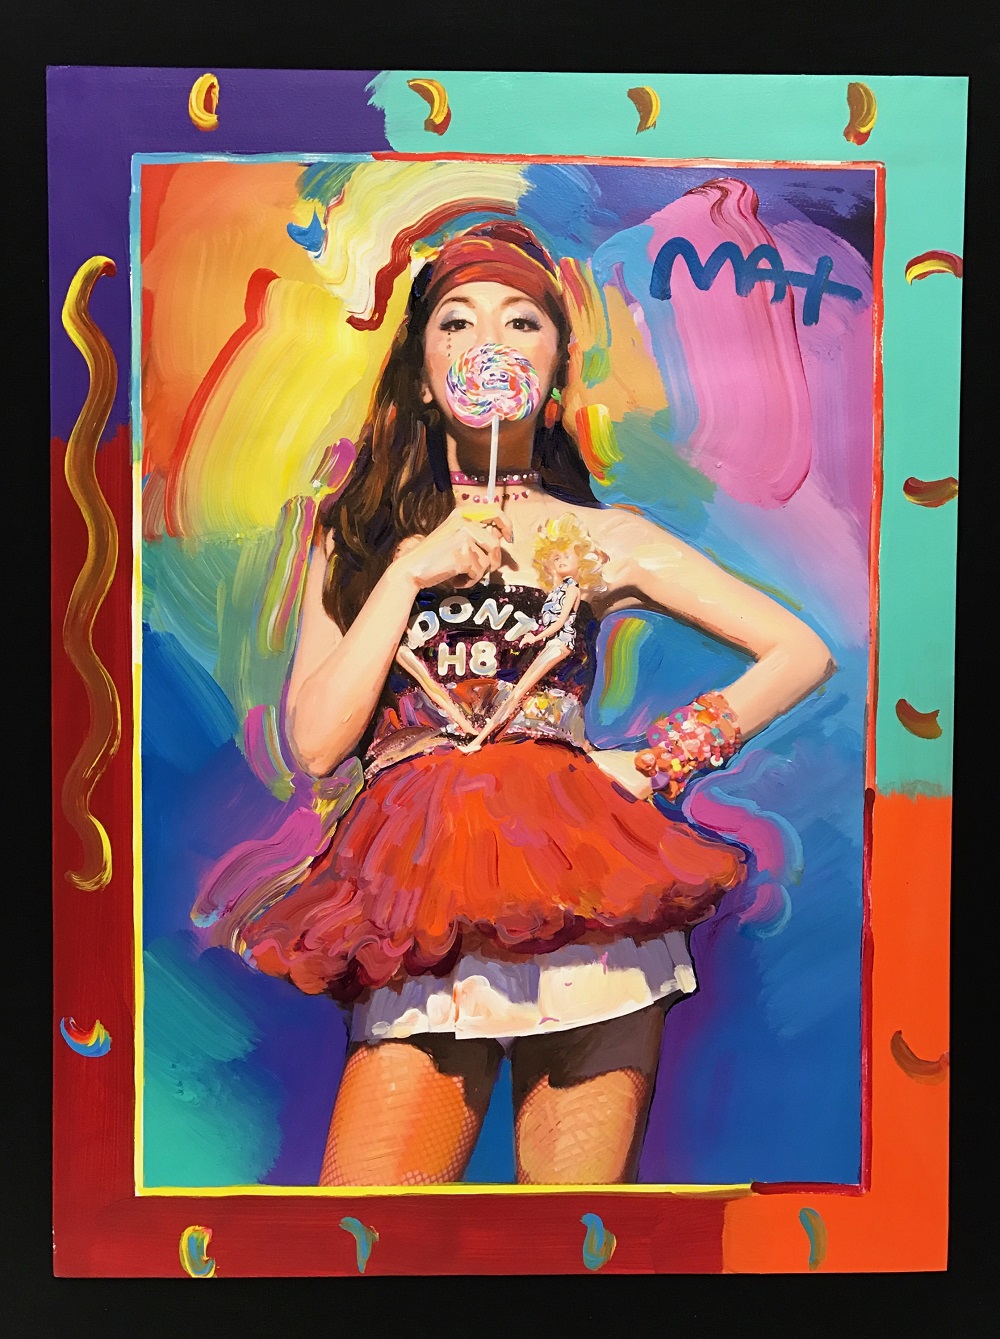 Peter Max's portrait of G.E.M. that will be auctioned off for charity aboard Royal Caribbean International’s Quantum of the Seas cruise ship. Park West Gallery, Peter Max cruise ship art